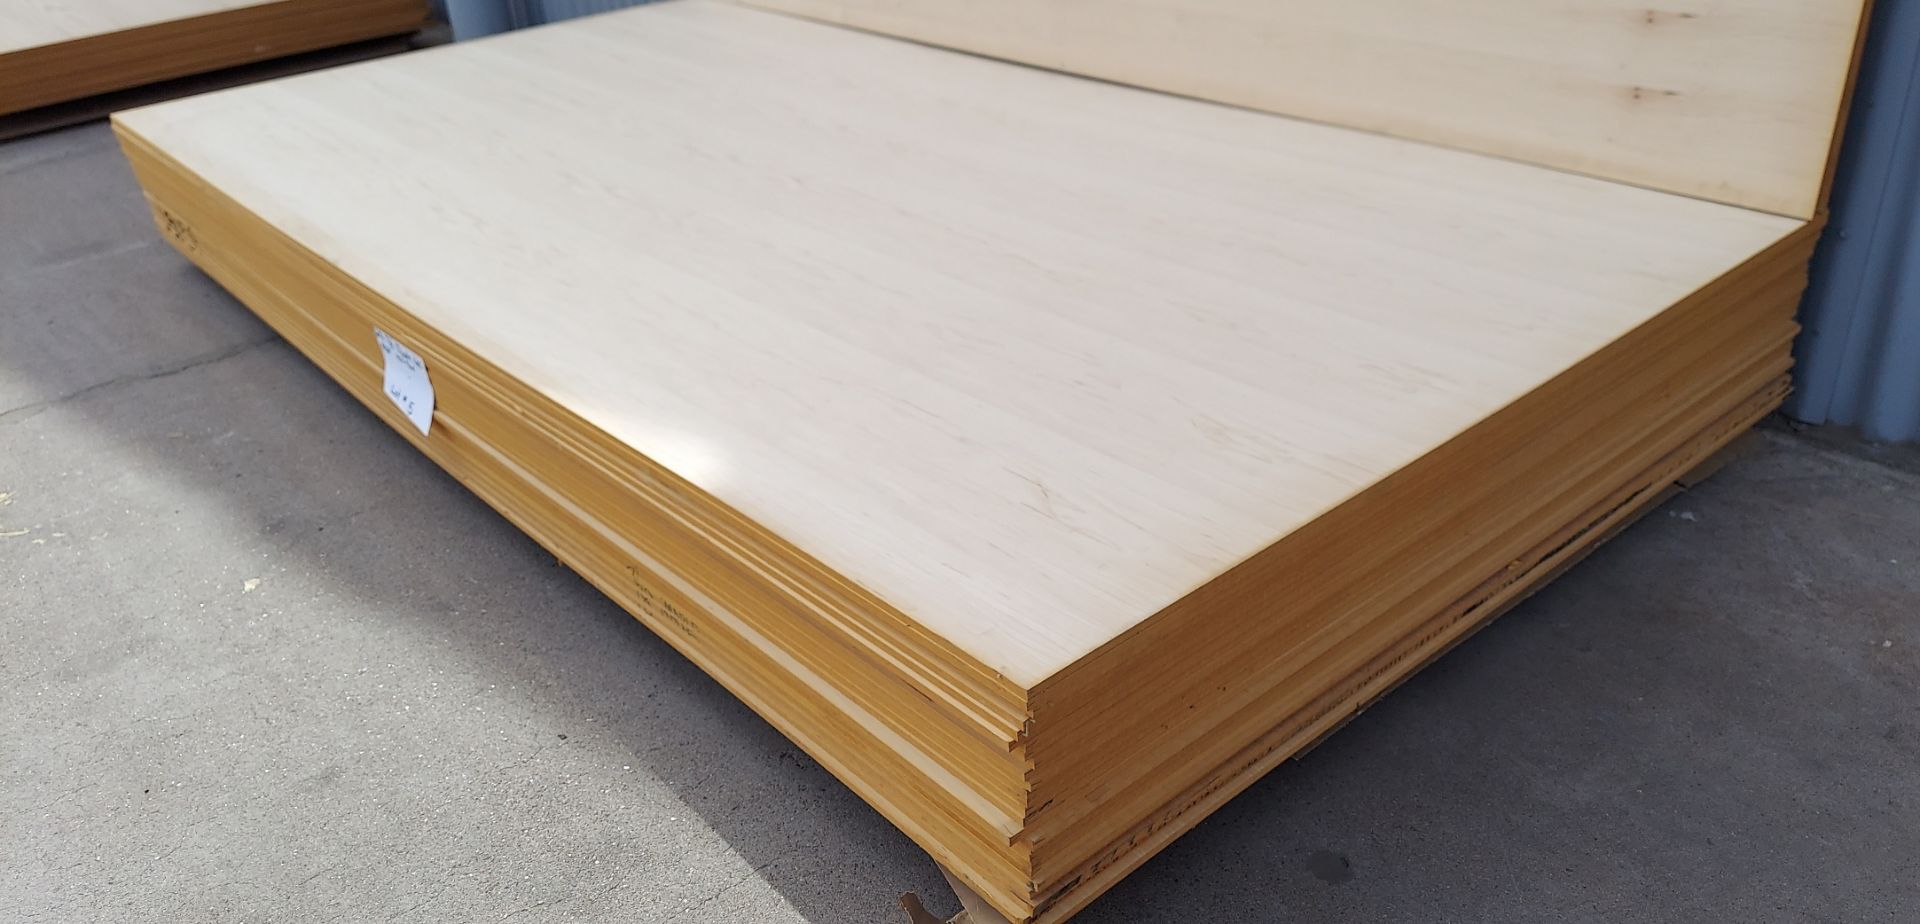 29 Sheets - 3/8" Maple G2S MDF 48-1/2" X 96-1/2" - Image 3 of 6